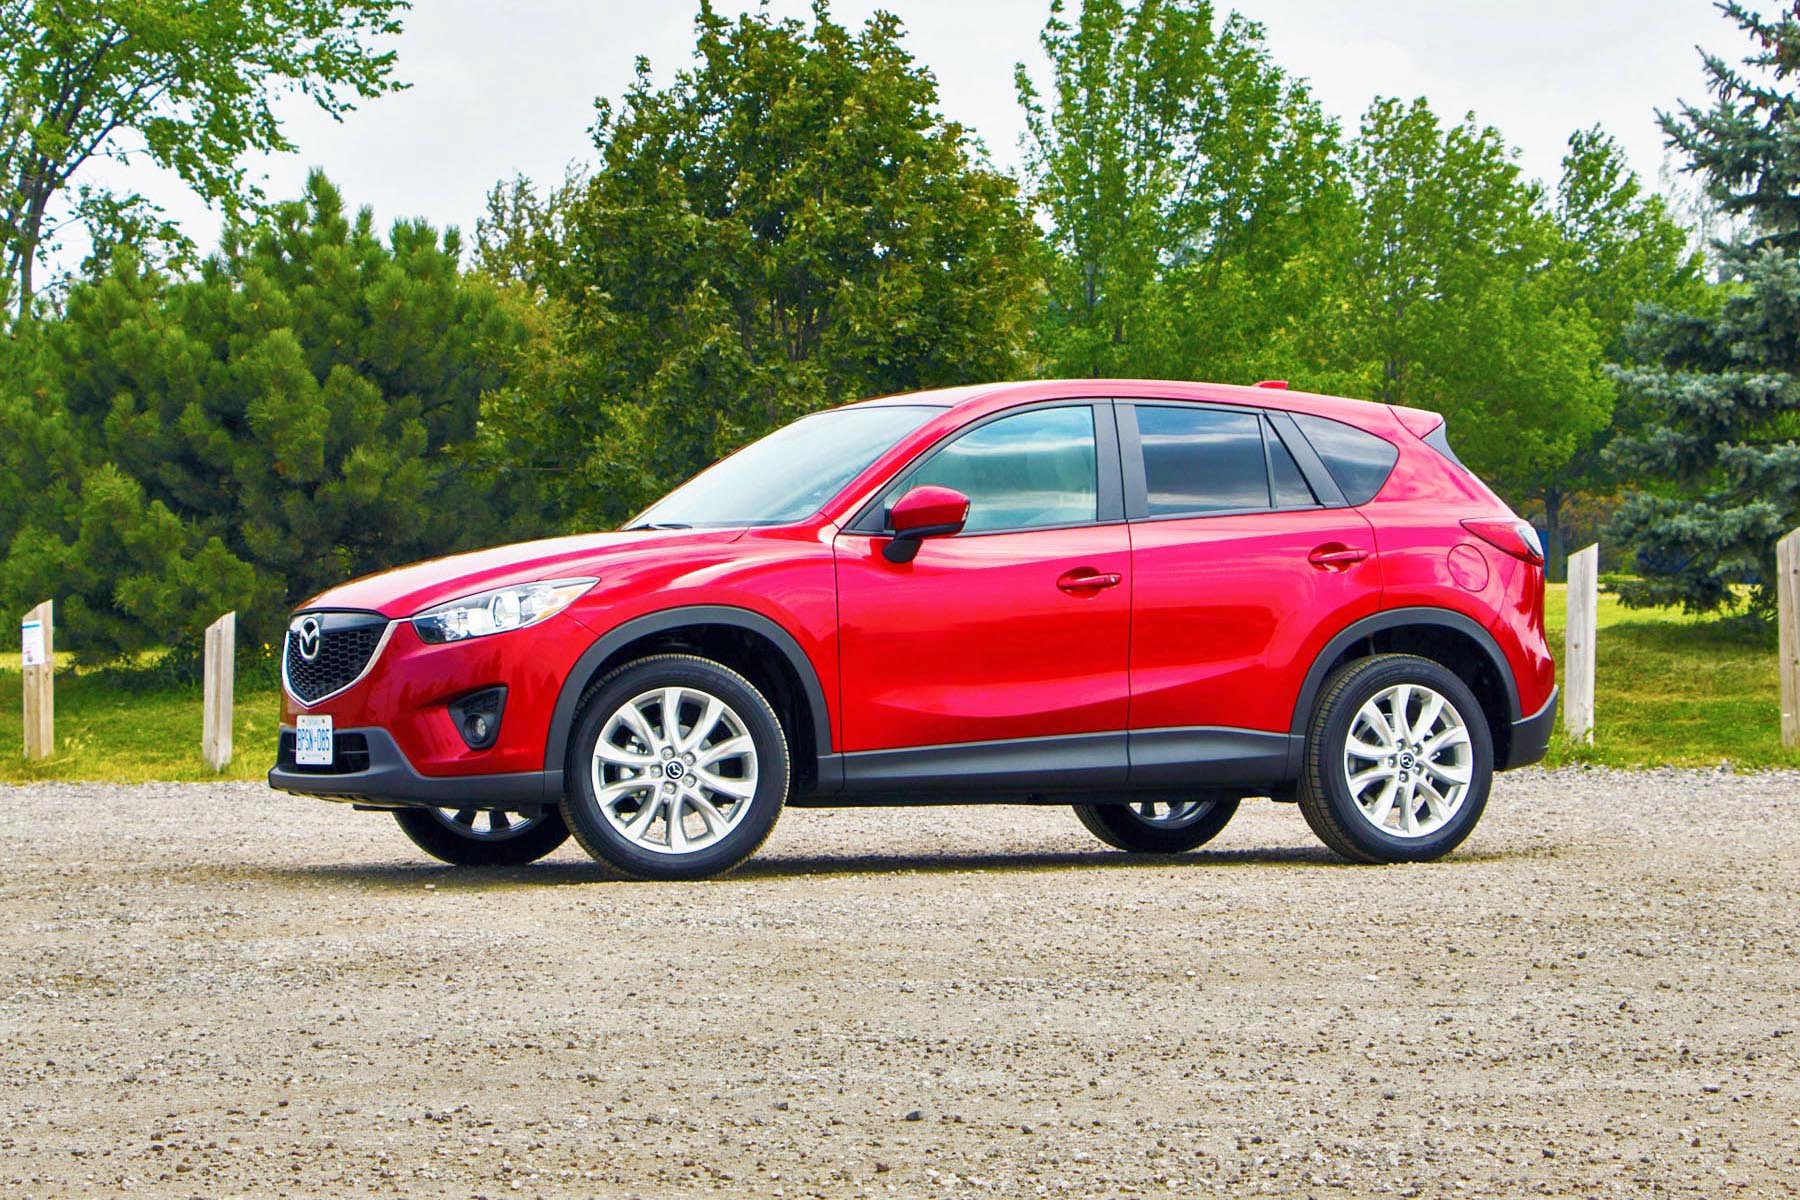 It's zoom-zoom for the whole family – the perfect car for you is a Mazda CX-5. Mazda's crossover is efficient enough for the everyday commute, but has the chutzpah to carve up a backroad like it was built by the same people who assemble the Miata. Oh wait: it was!